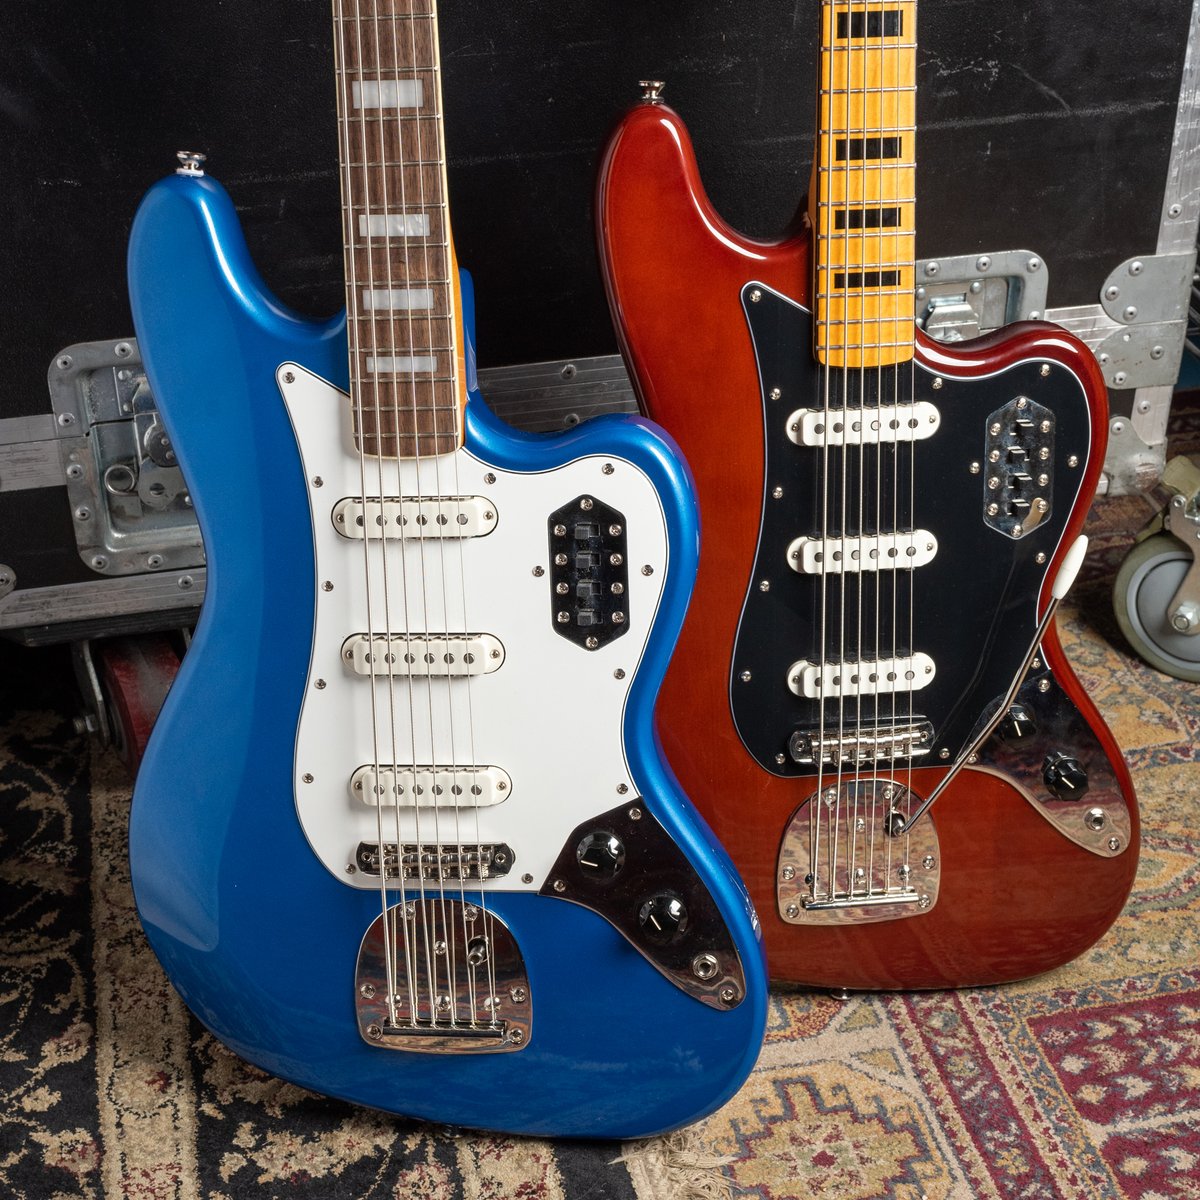 Complete with block inlays and neck binding, plus a matching headcap, these beauties are truly a sight to behold! It’s another #SixStringSaturday here in CME’s BASSment, and we can’t stop ogling these Squier Classic Vibe Bass VIs! bit.ly/31LotiW #CMEexclusive #Squierbass